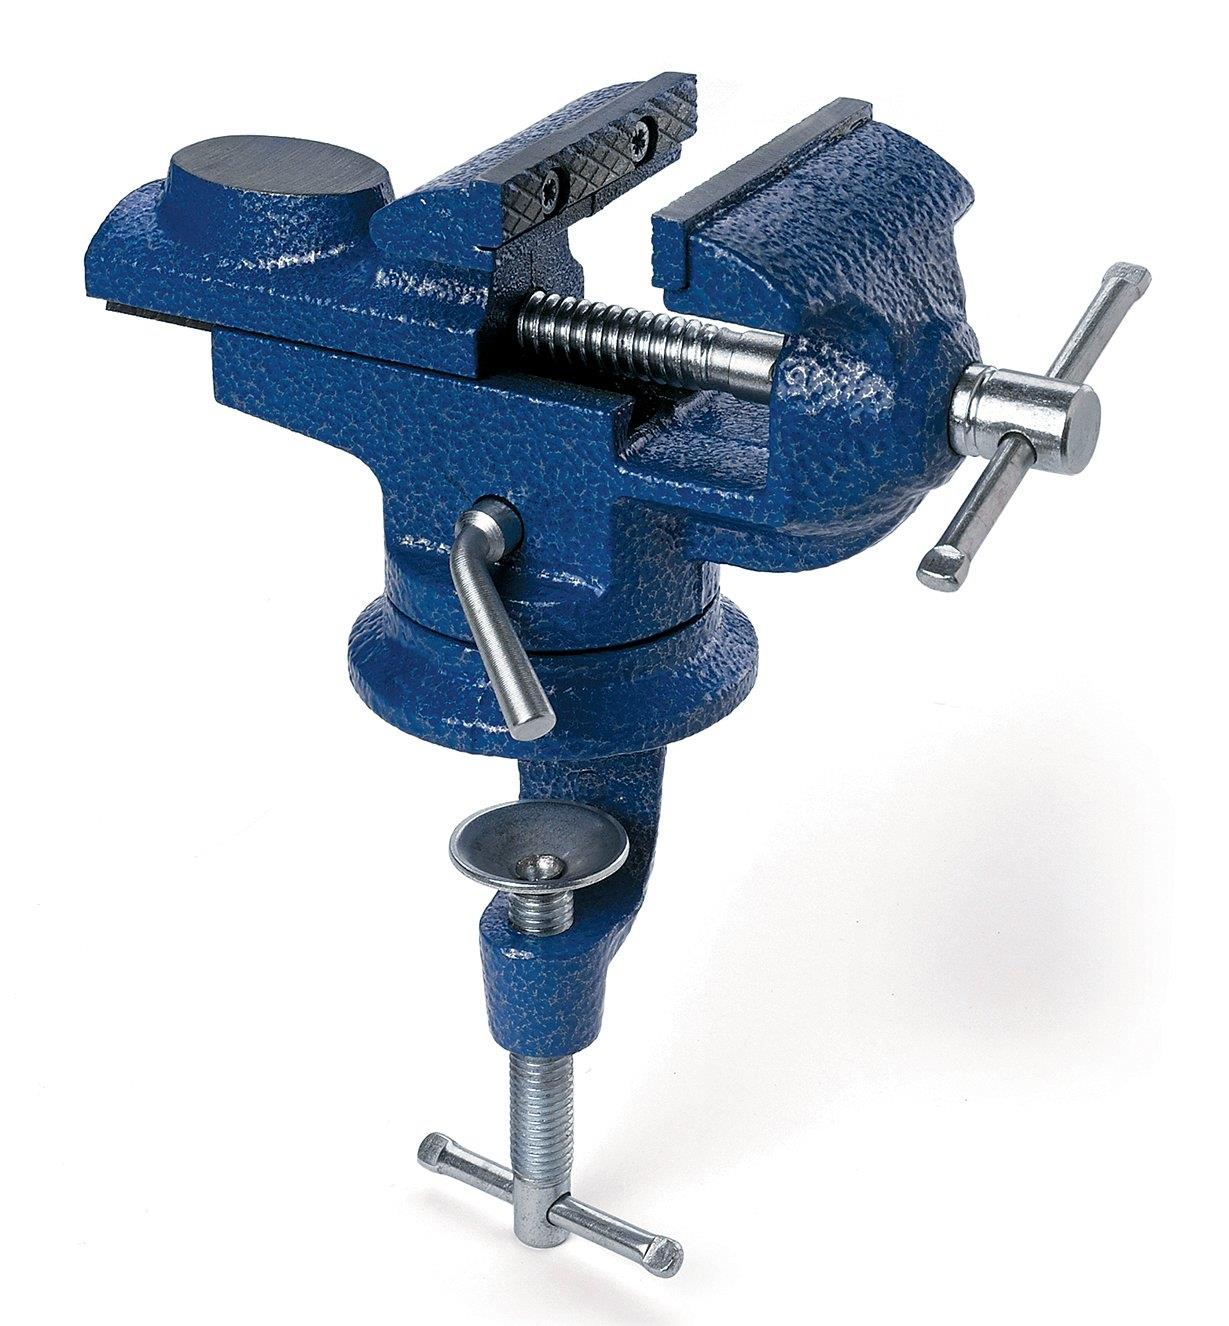 09A0499 - Clamp-On Swivel Vise